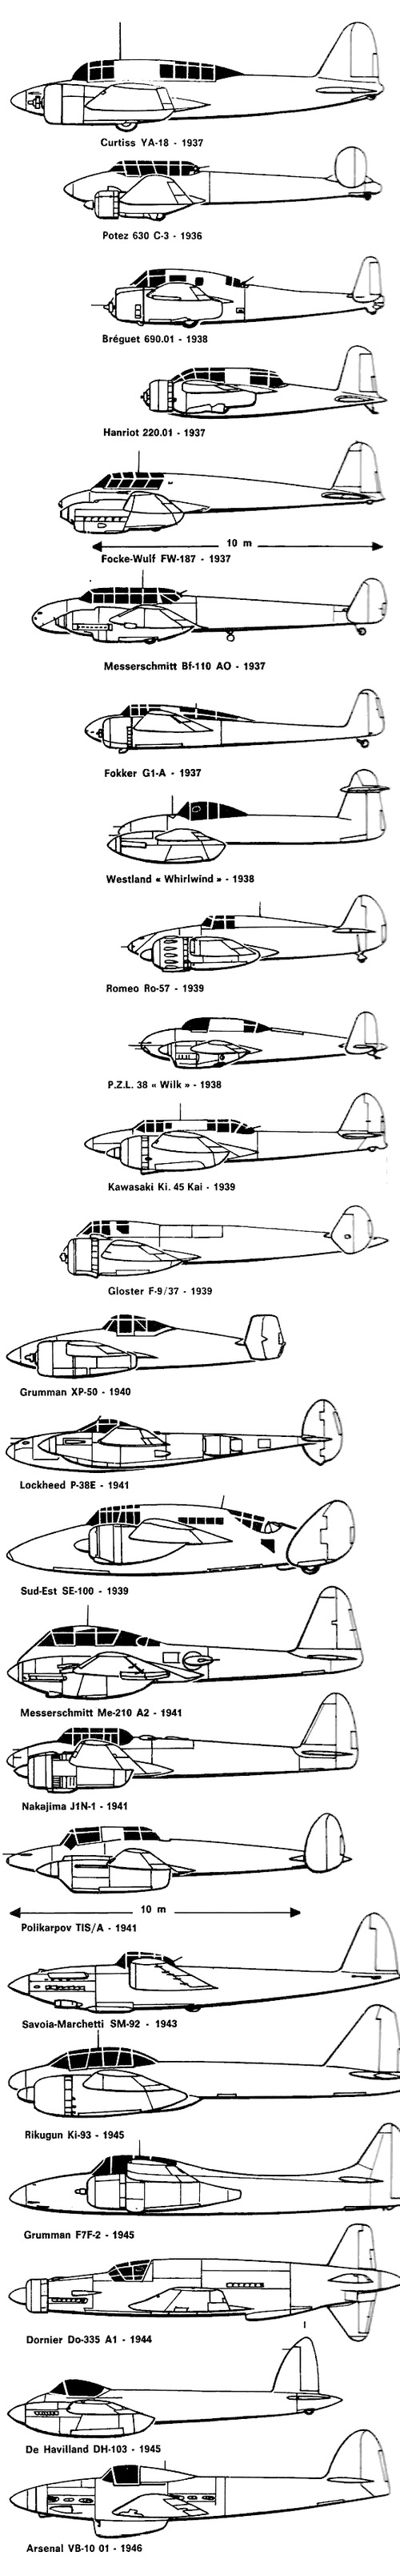 Two-Engined Bombers (1930)